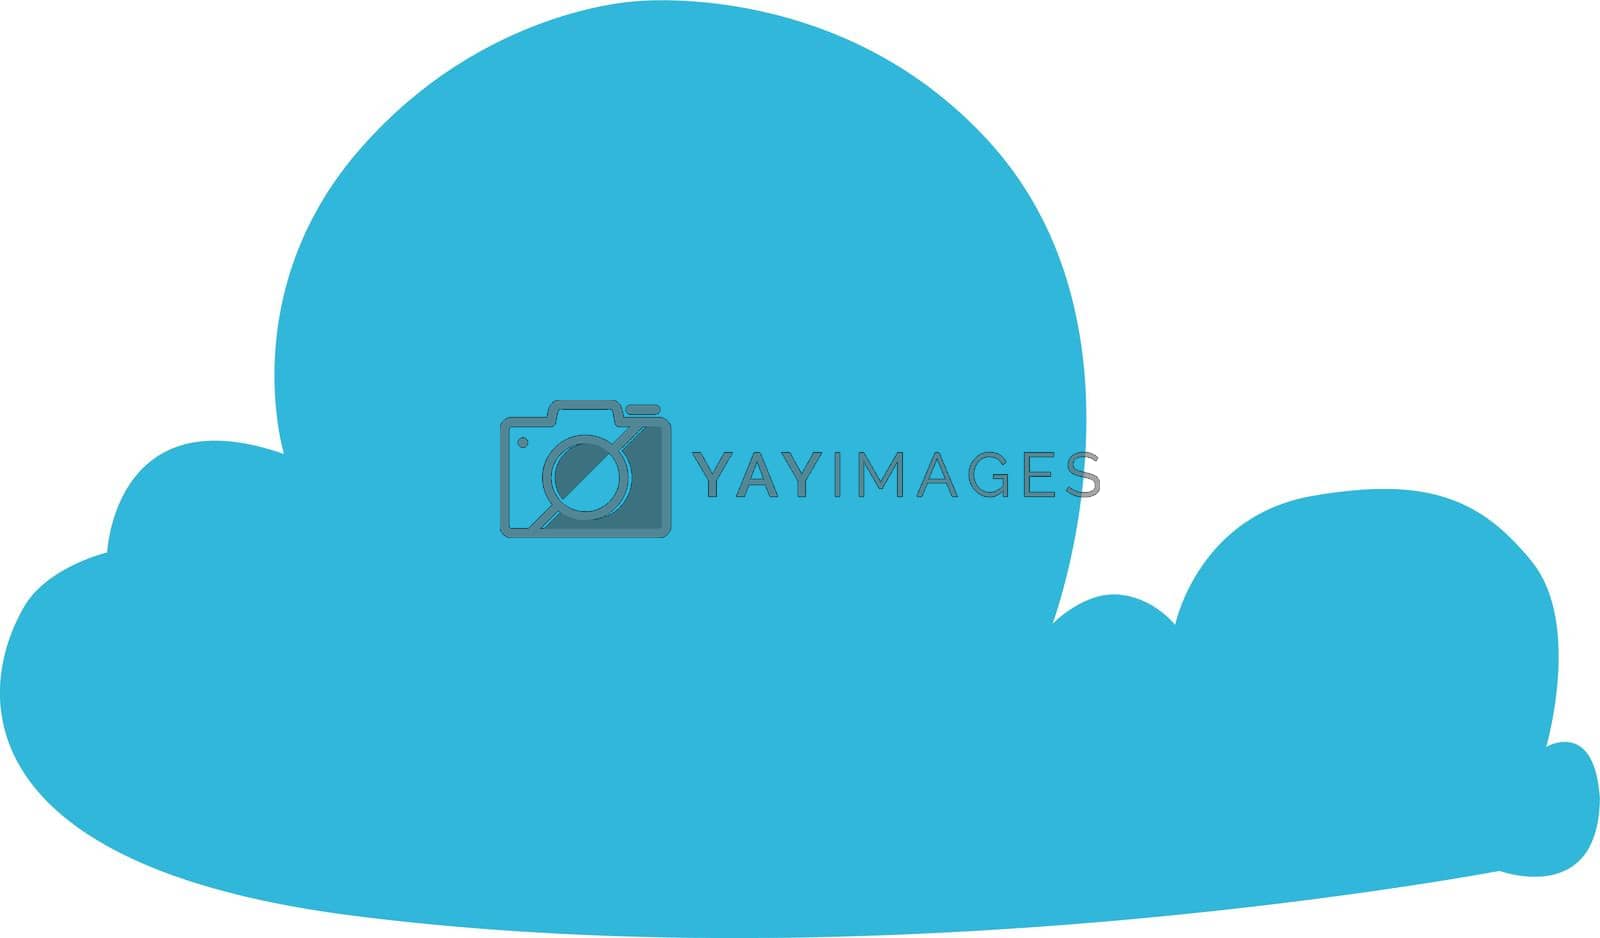 Royalty free image of Cloud symbol. Decorative sky element. Weather icon by ONYXprj